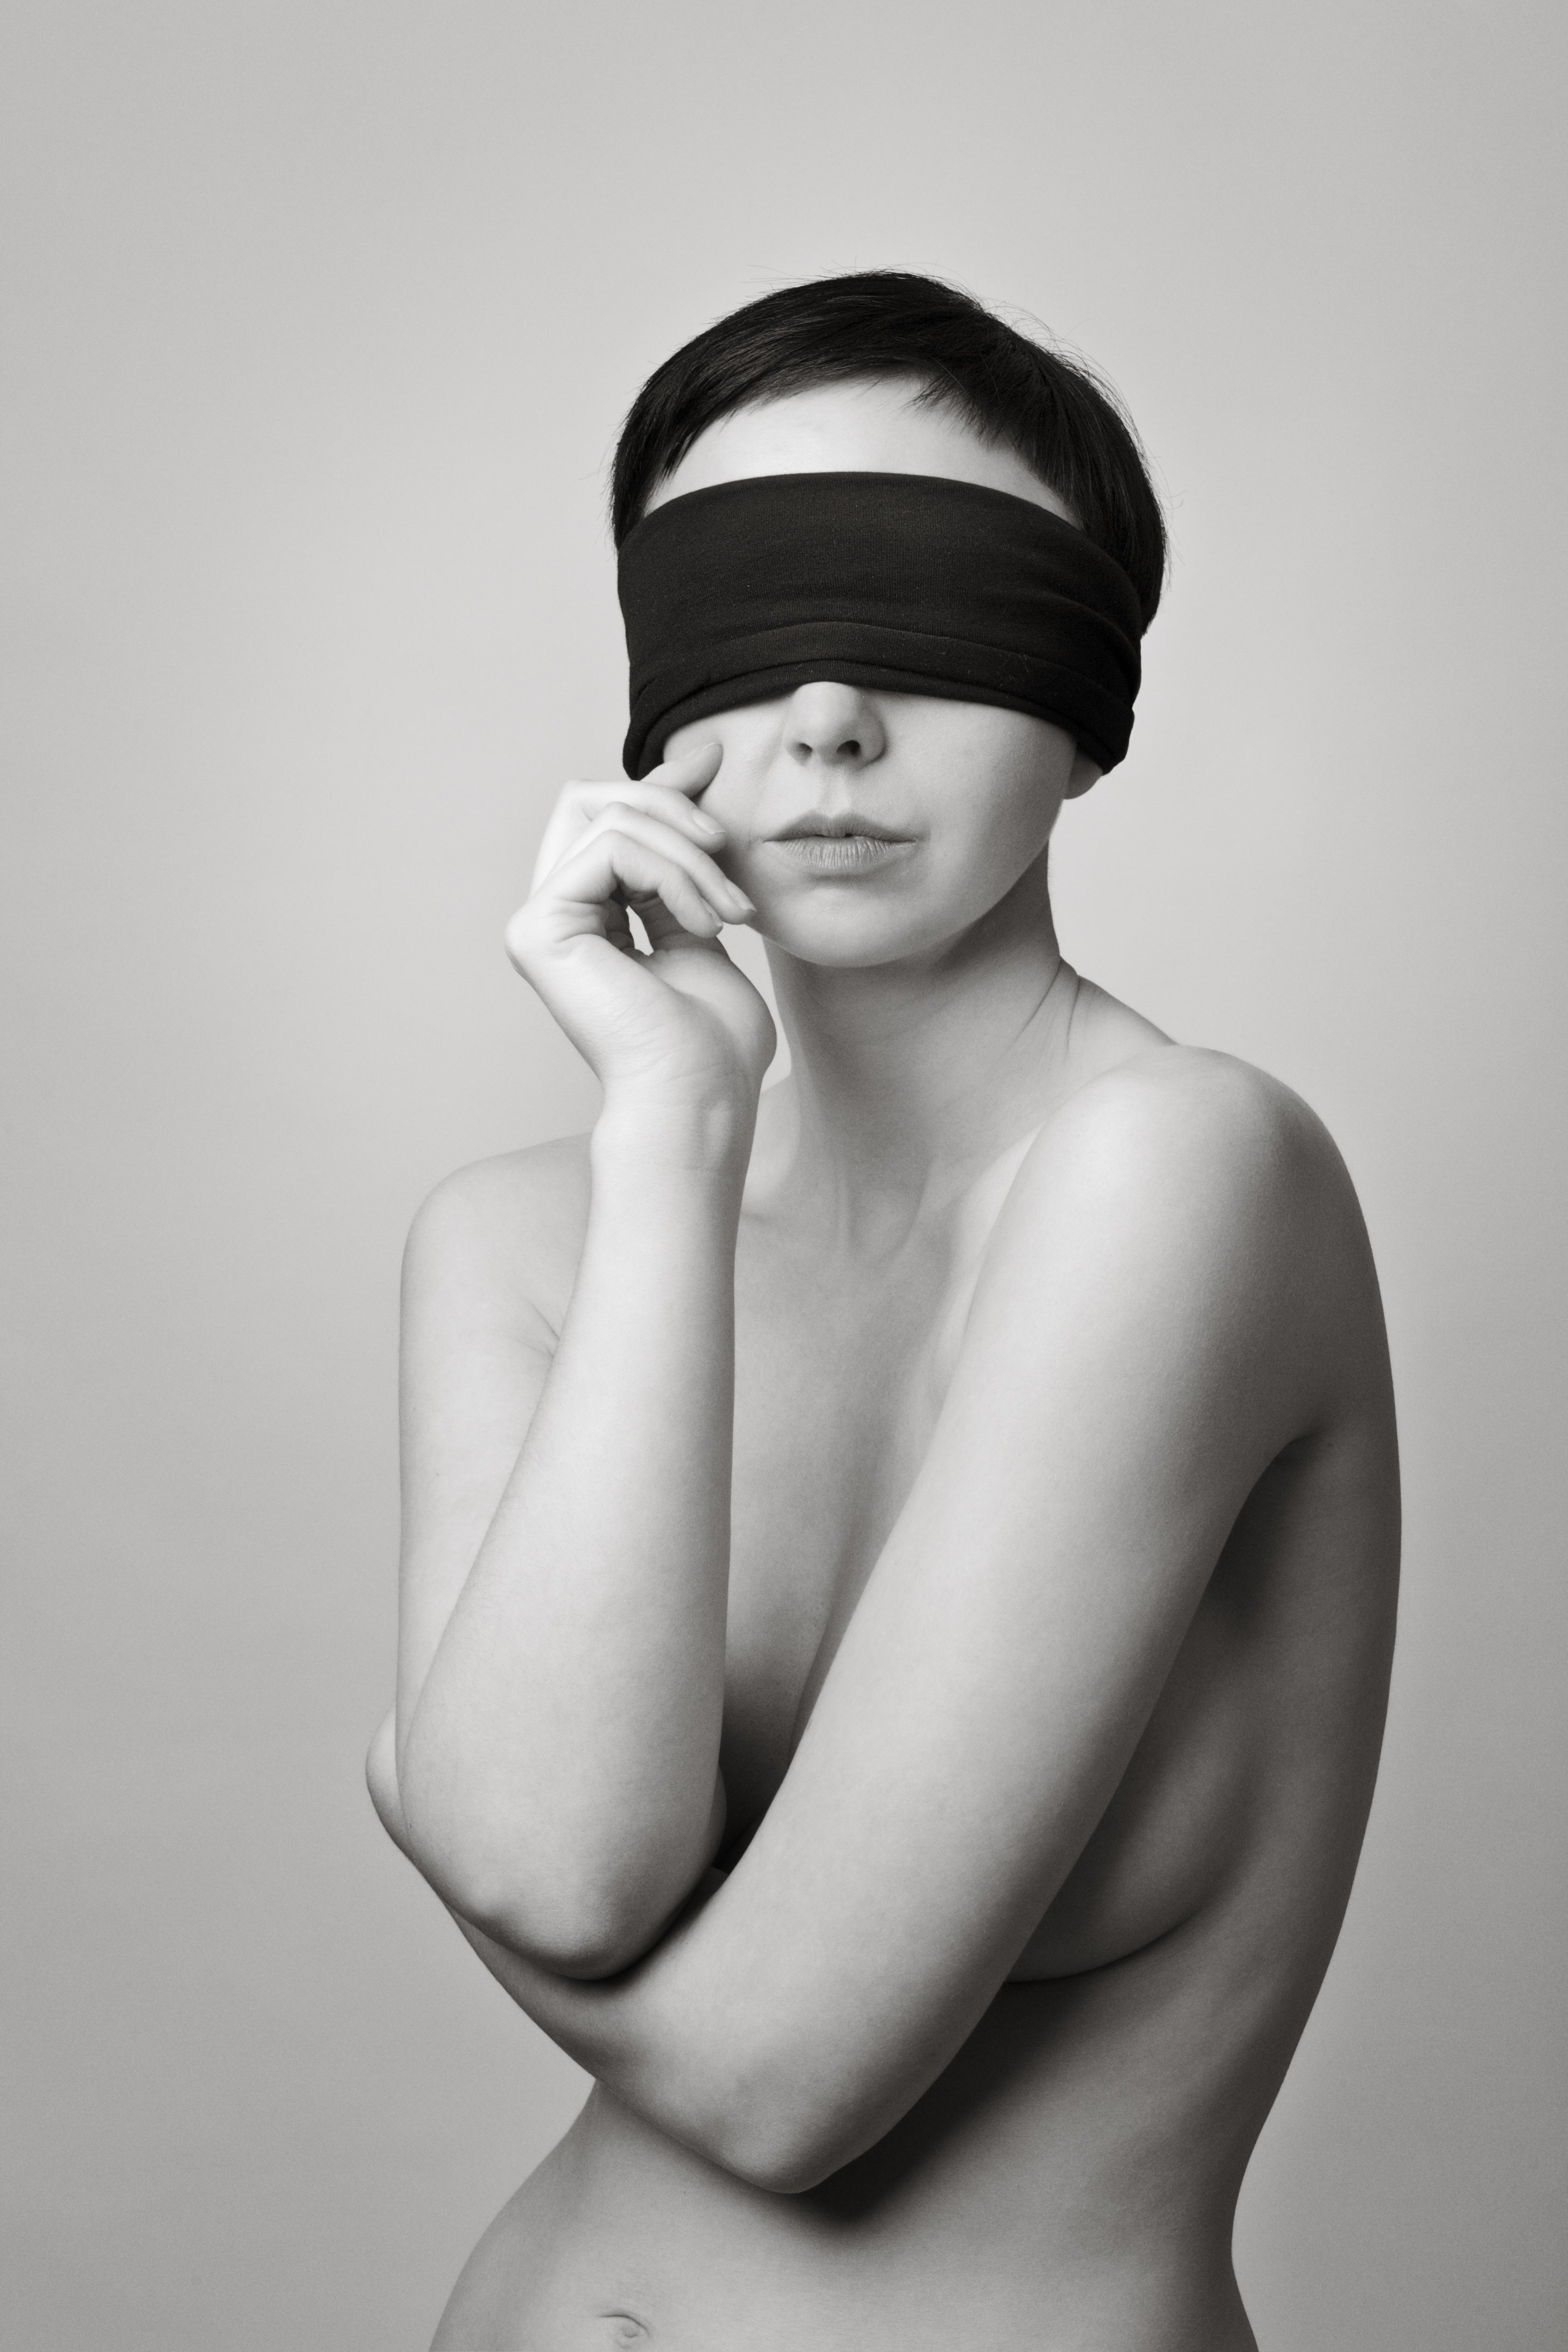 6 creative ways to use blindfolds during sex